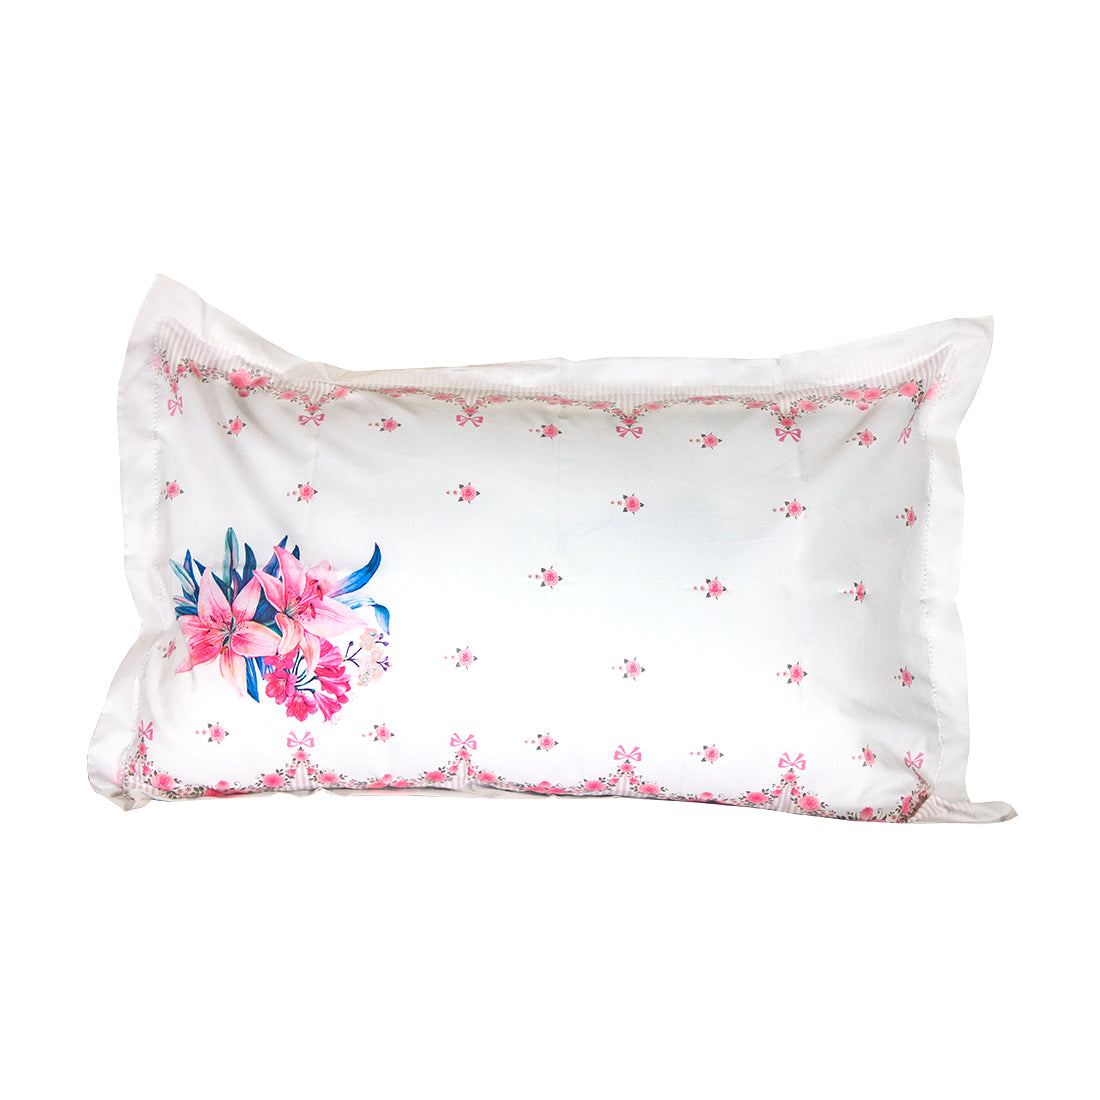 V2G Printed Pillow Covers- Scallop Flower Border- Pair